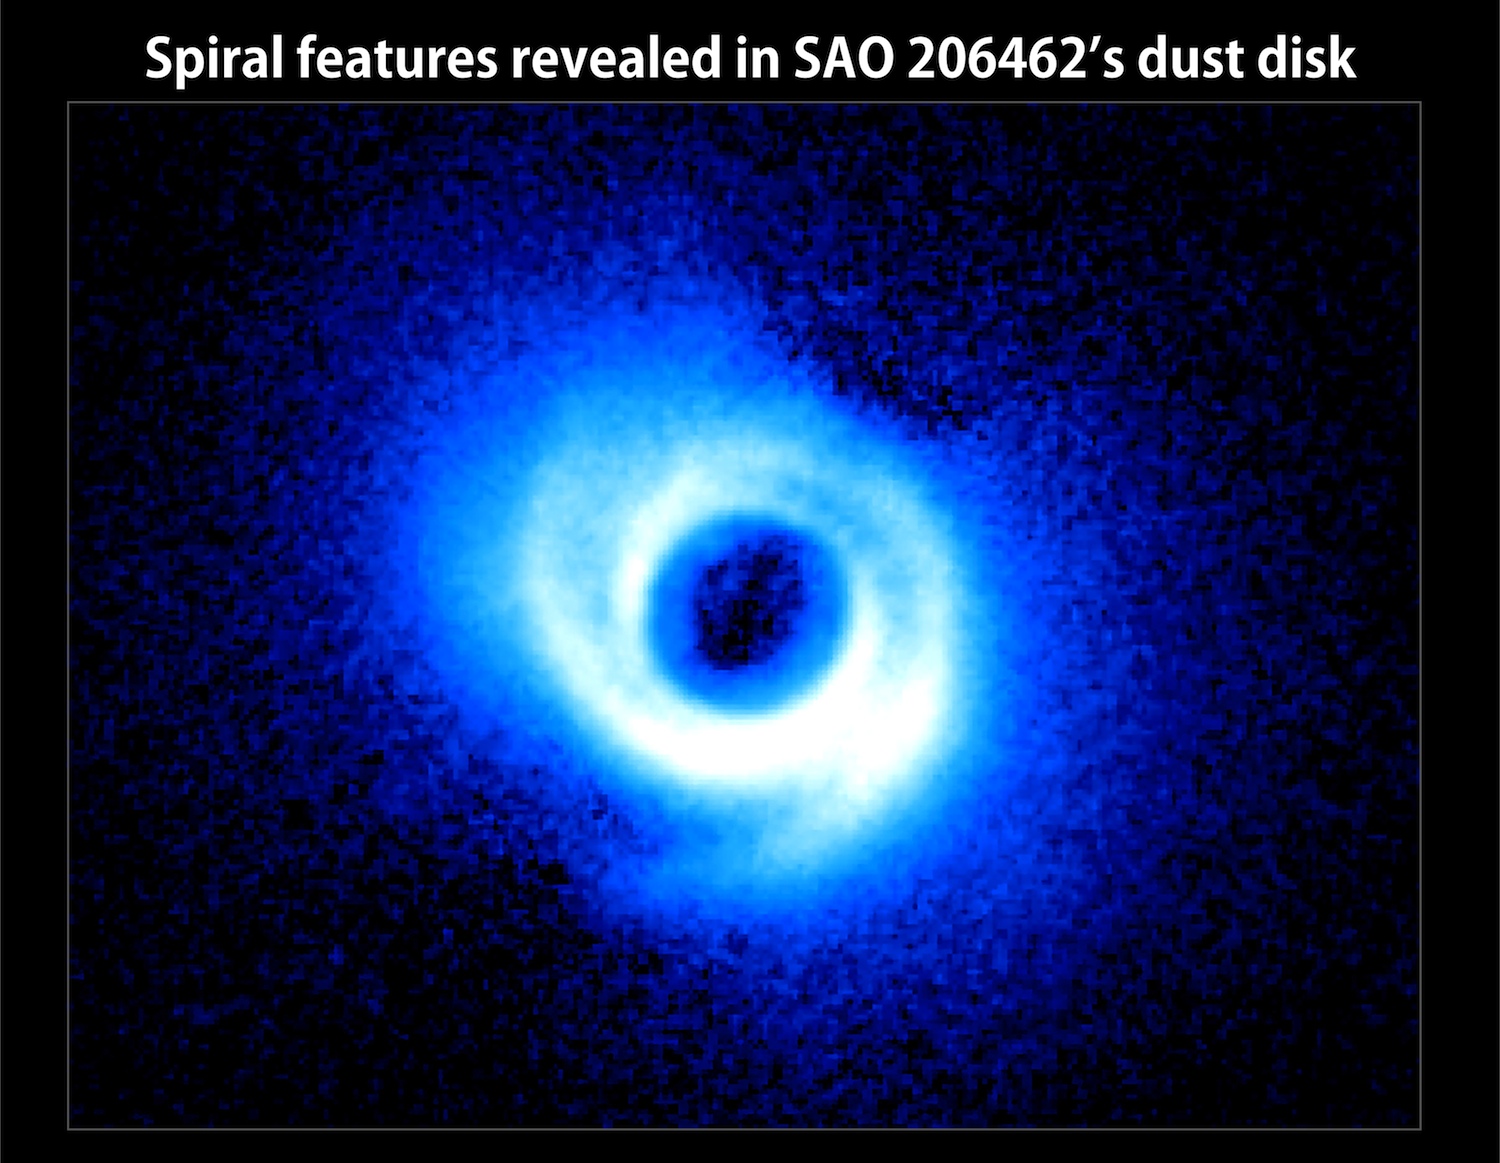 Two spiral arms emerge from the gas-rich disk around SAO 206462, a young star in the constellation Lupus. This image, acquired by the Subaru Telescope and its HiCIAO instrument, is the first to show spiral arms in a circumstellar disk. The disk itself is some 14 billion miles across, or about twice the size of Pluto's orbit in our own solar system. No Labels. Credit: NAOJ/Subaru